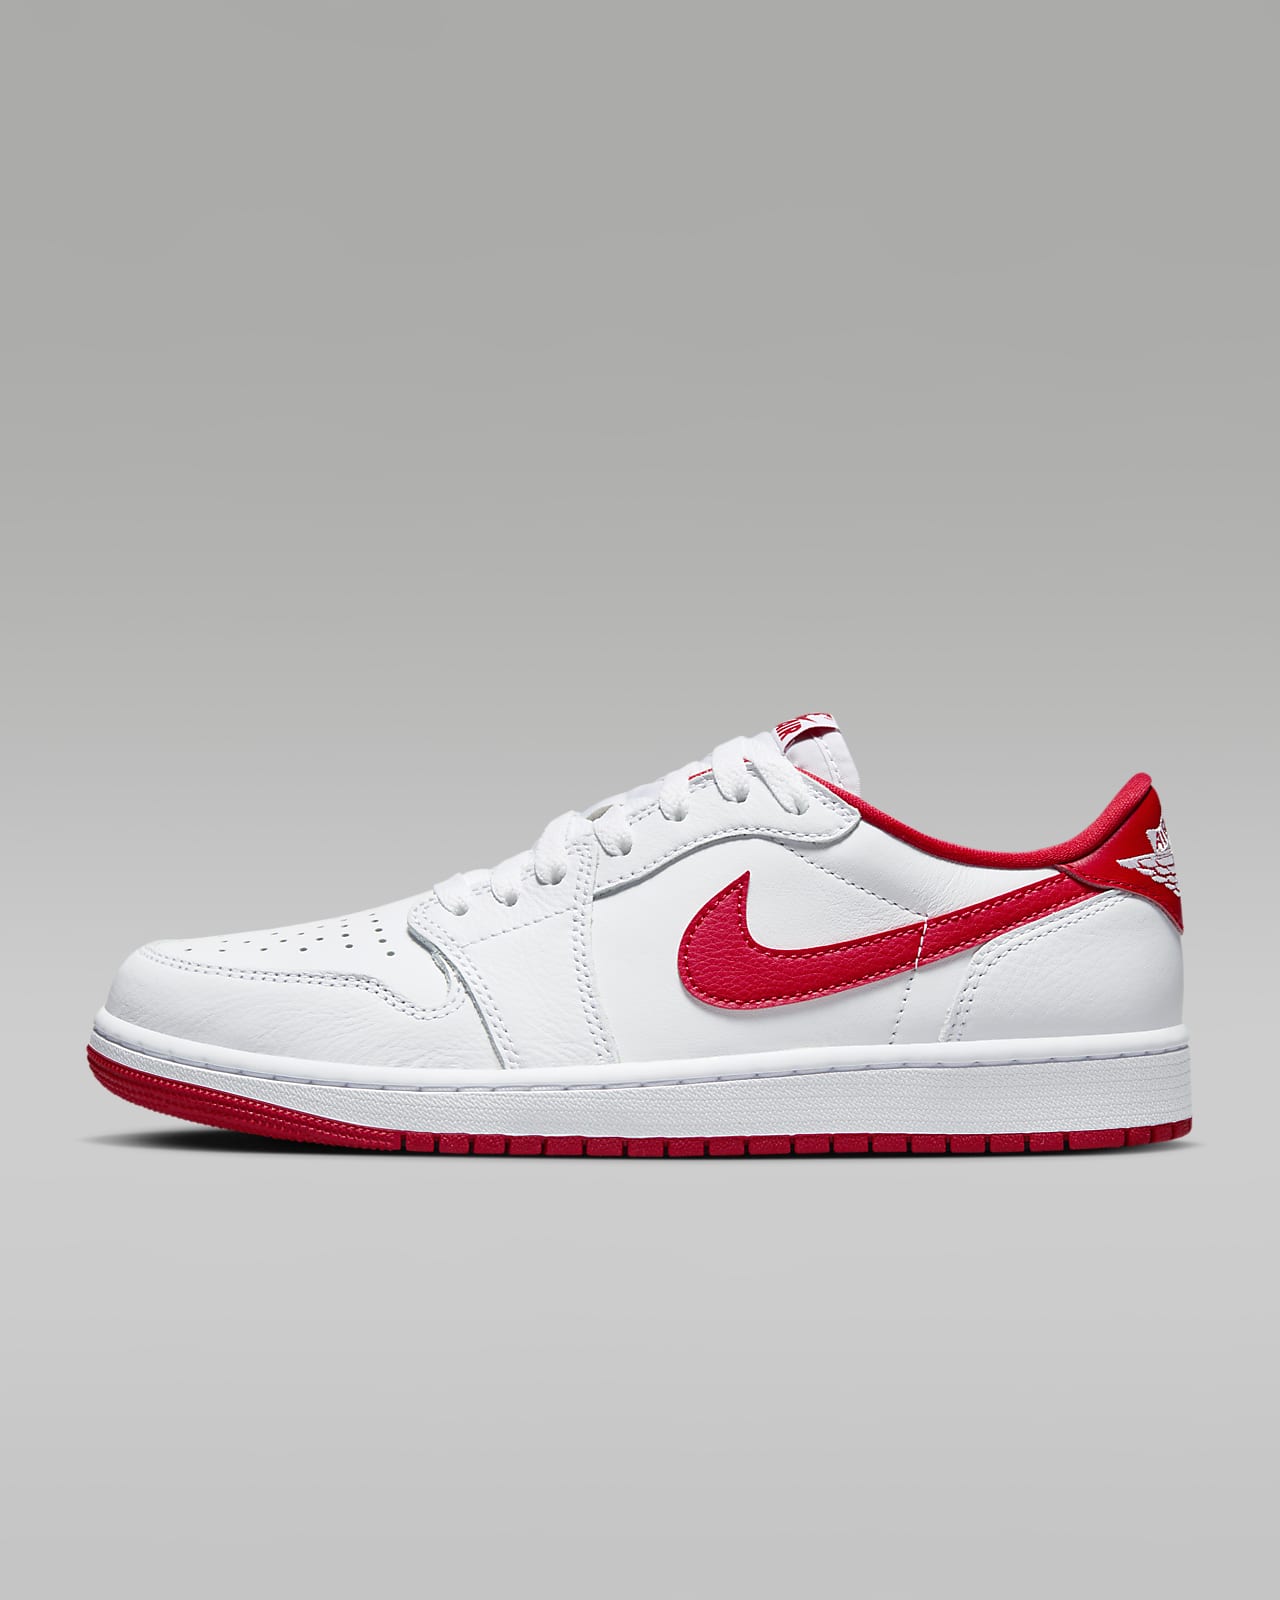 Air 1 Low OG 'White/Red' Men's Shoes. Nike